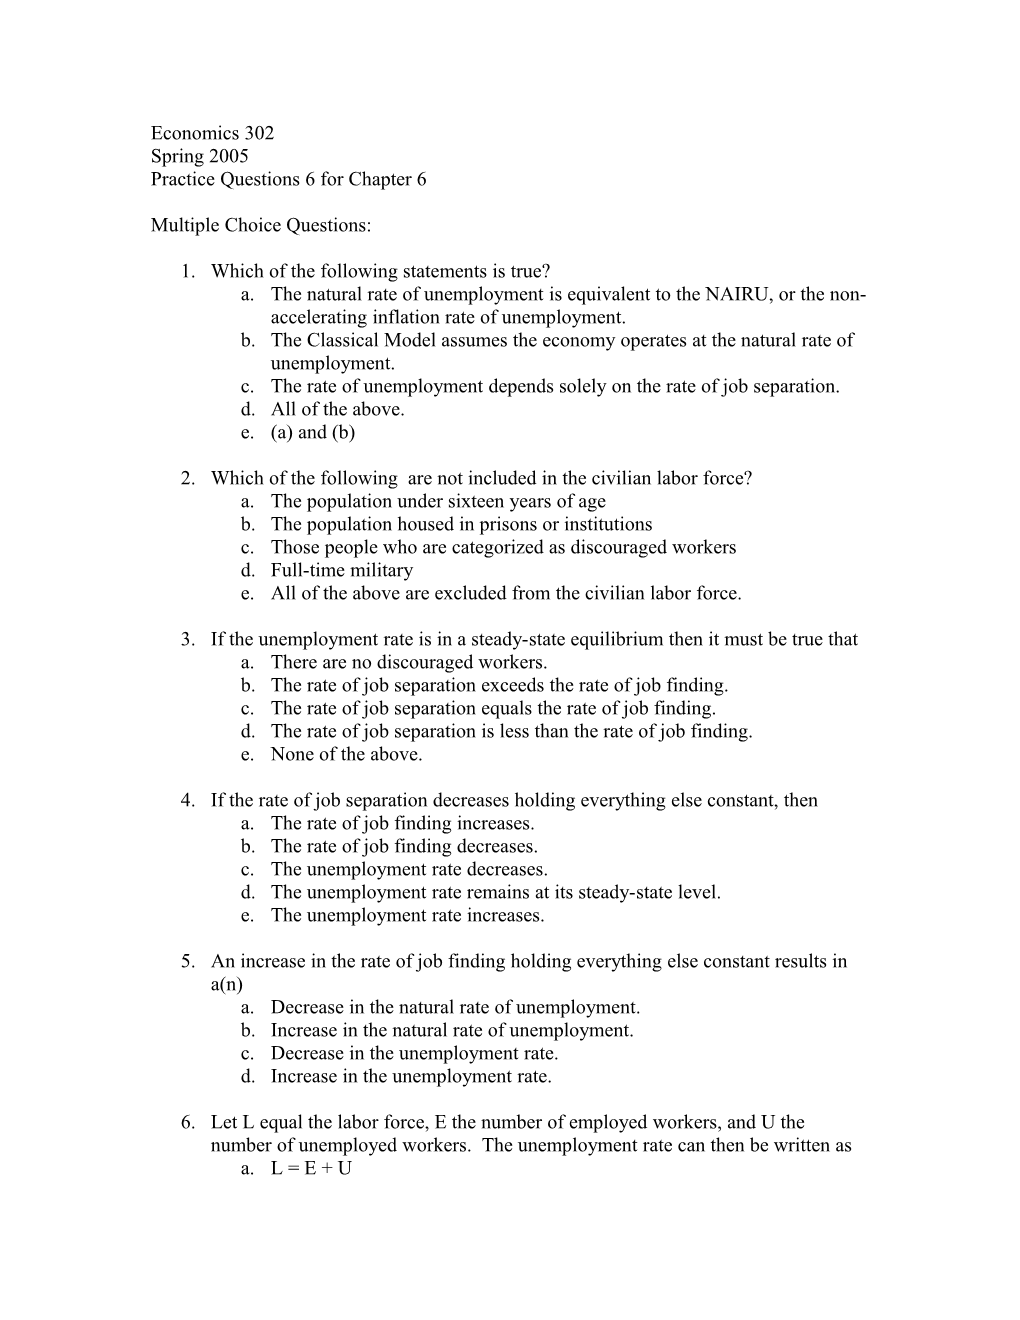 Practice Questions 6 for Chapter 6